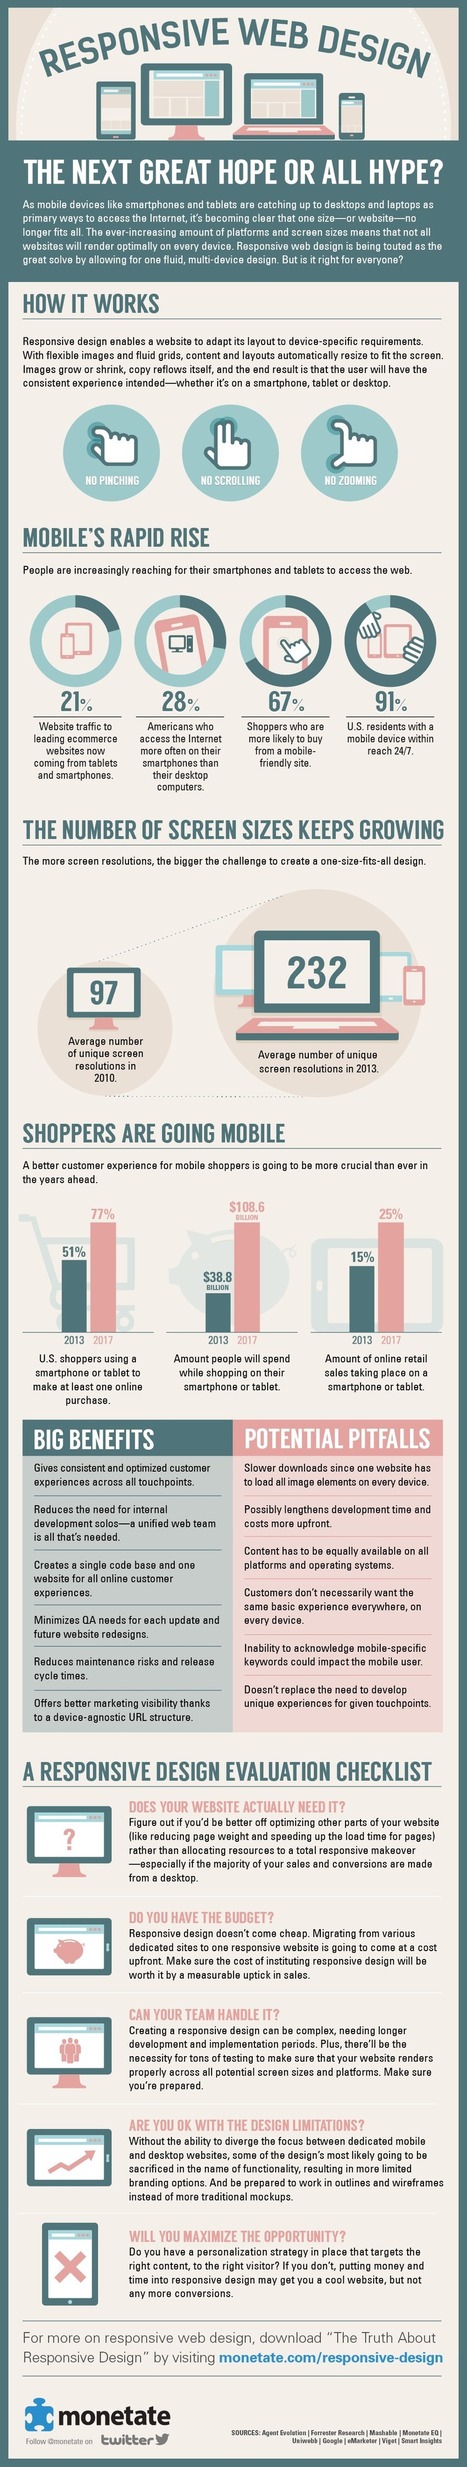 Responsive Web Design Infographic: Benefits and Pitfalls | Business Improvement and Social media | Scoop.it